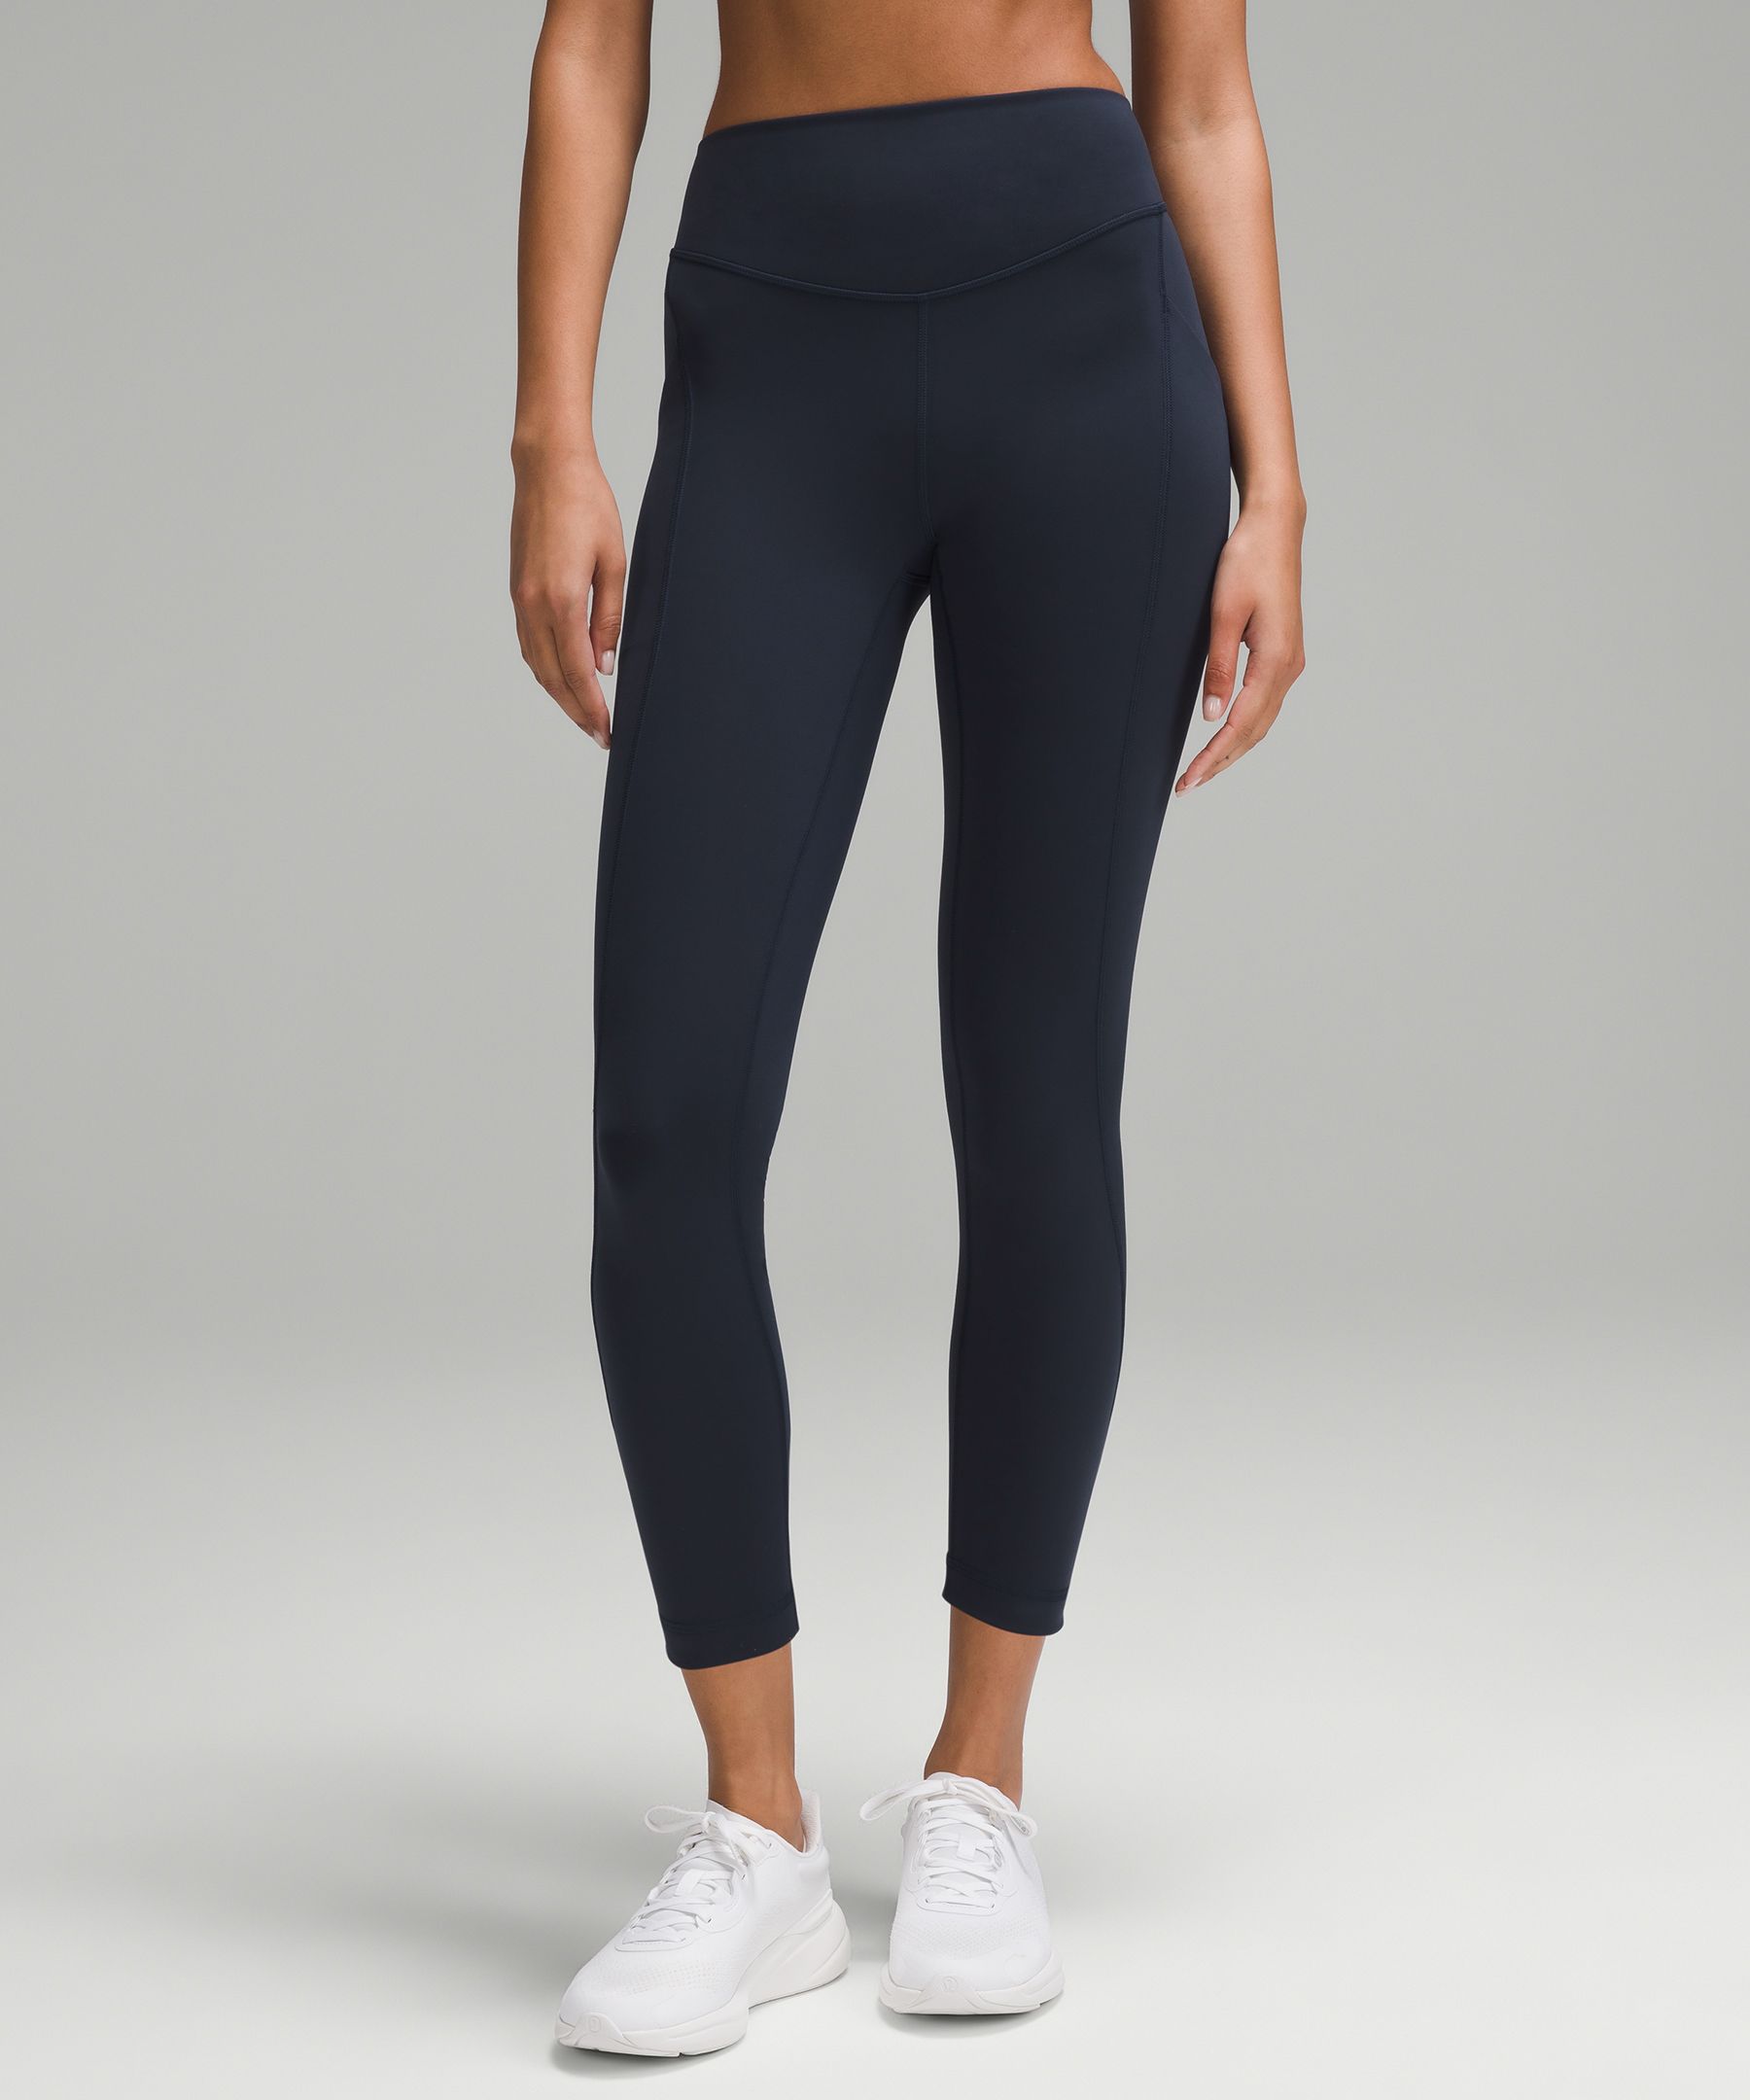 lululemon - The art of subtlety. Our classic Wunder Under Tights